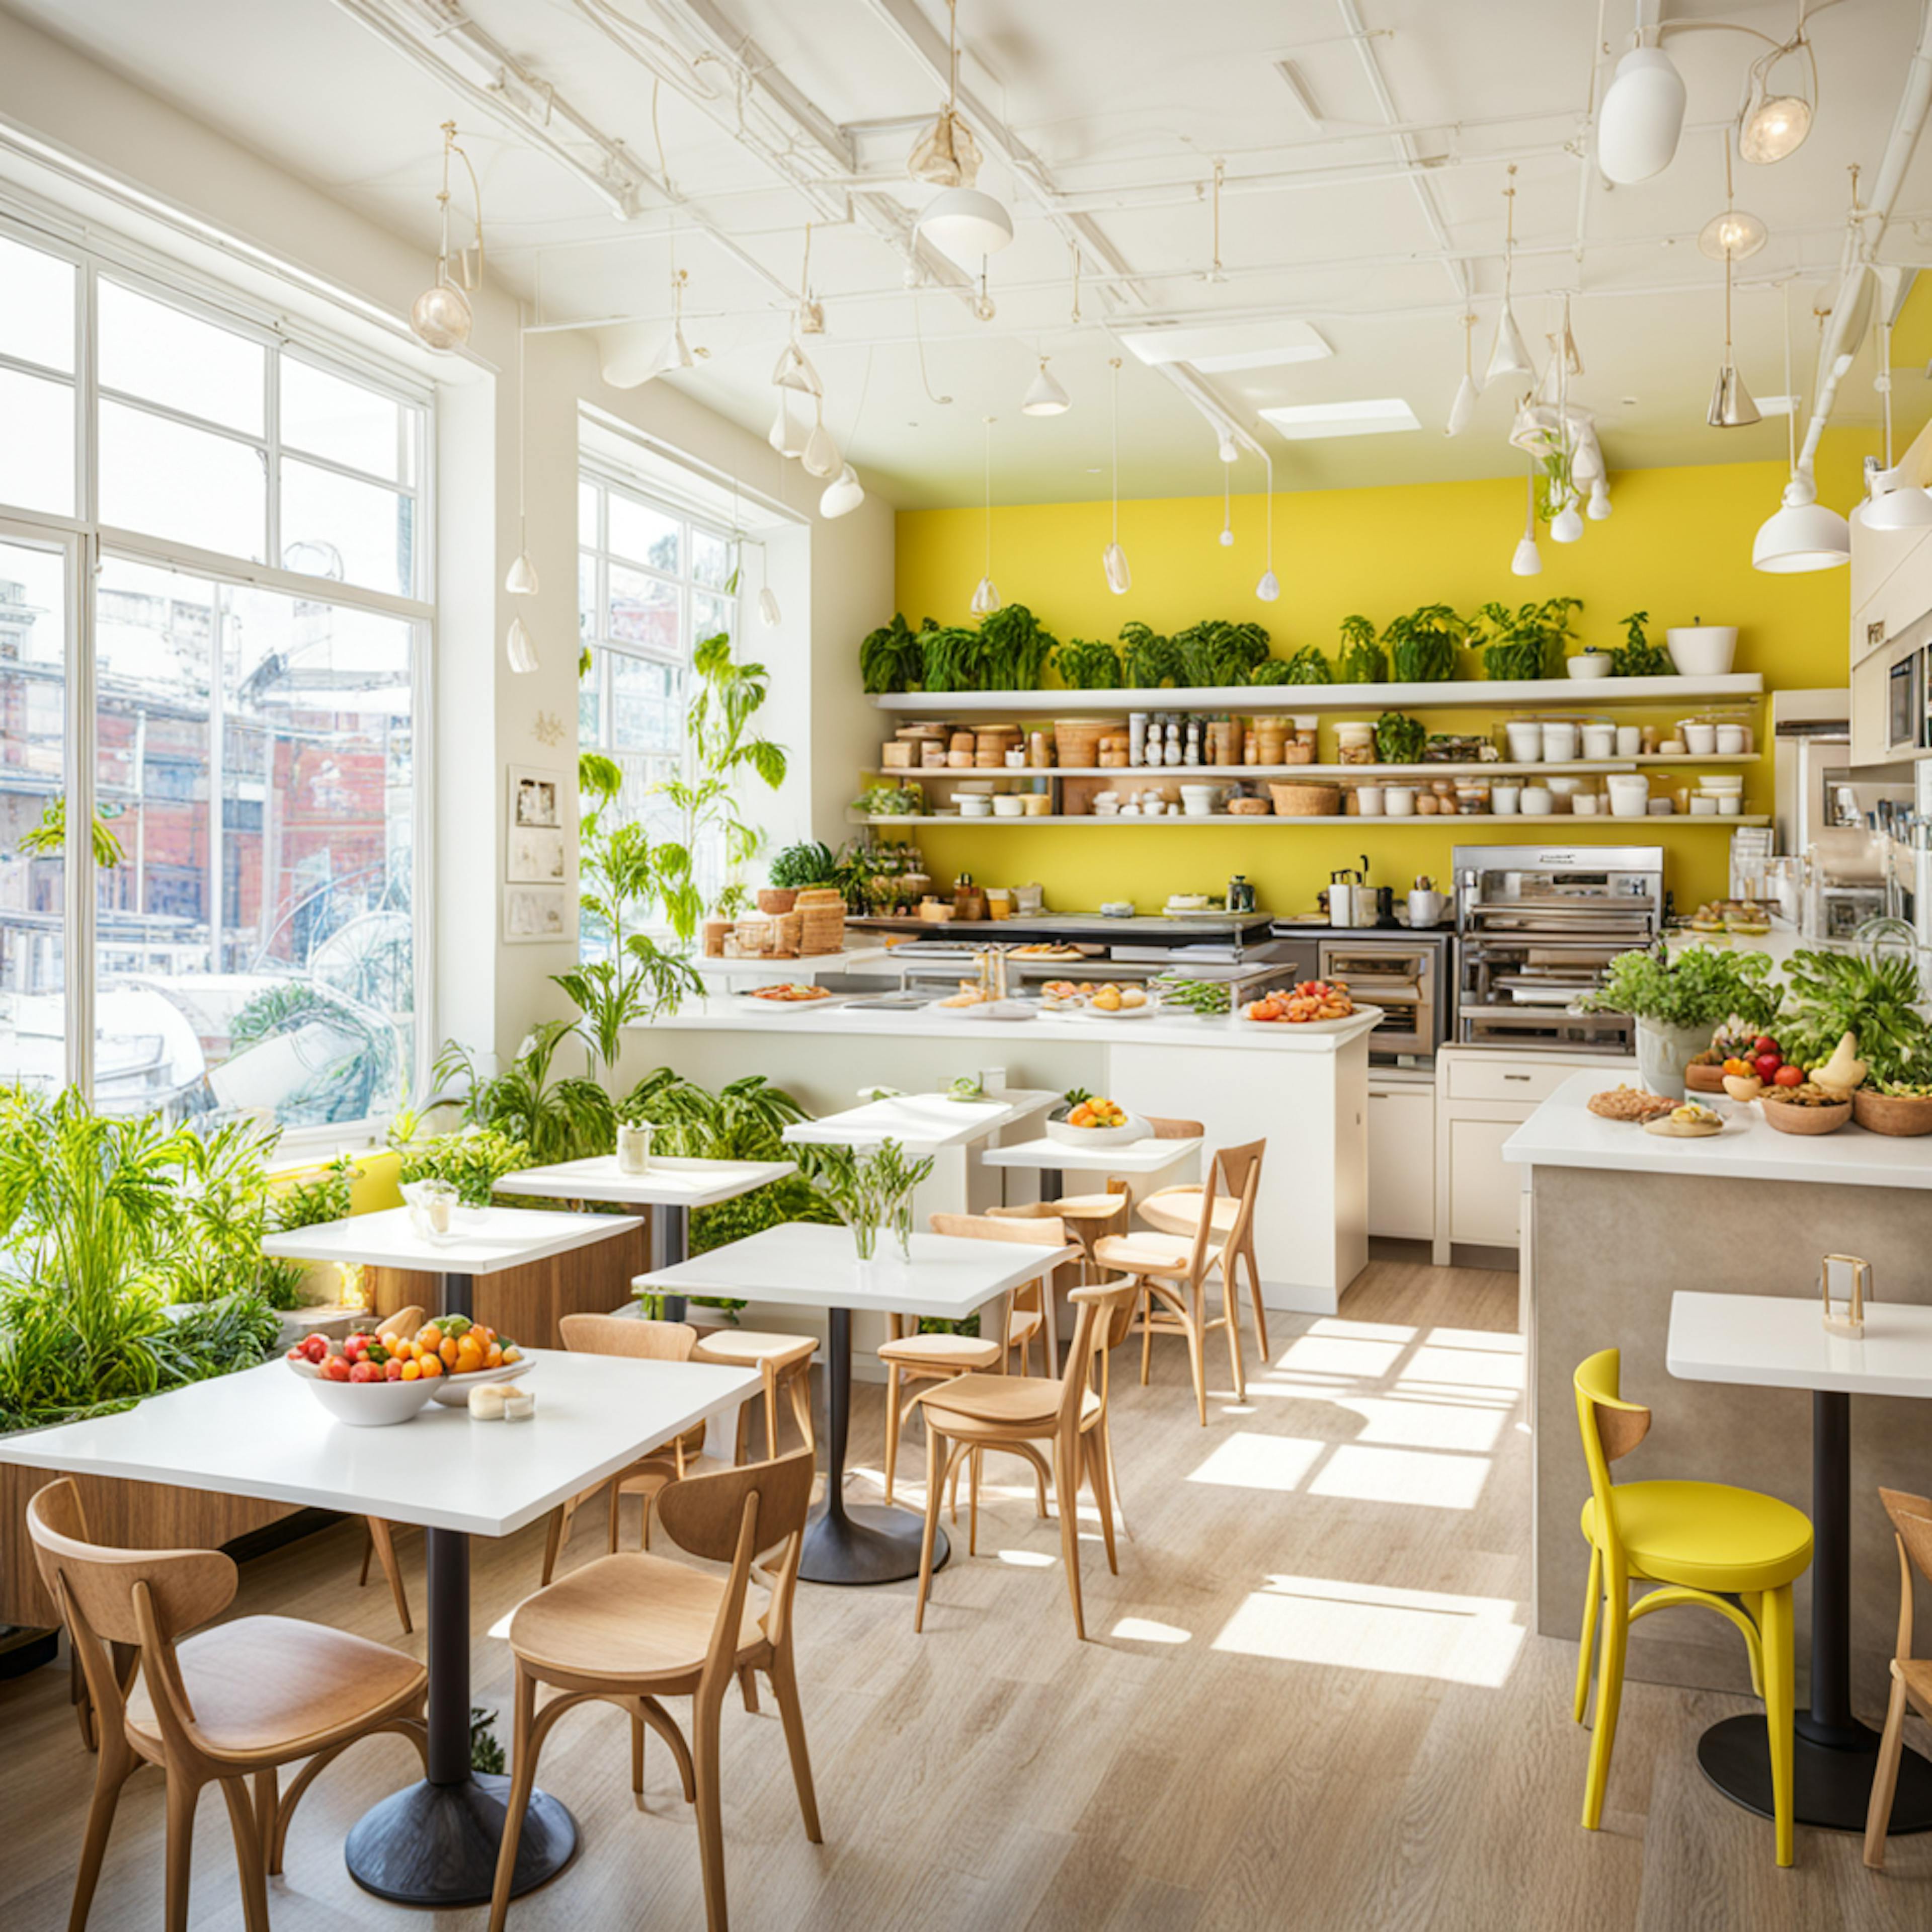 A bright and airy kitchen filled with natural light, featuring neatly arranged fresh produce, herbs, and other ingredients. The modern design and abundance of greenery create an inviting atmosphere that promotes healthy living. This image could be used in health and wellness marketing to highlight the importance of a clean, well-organized space for preparing nutritious meals.